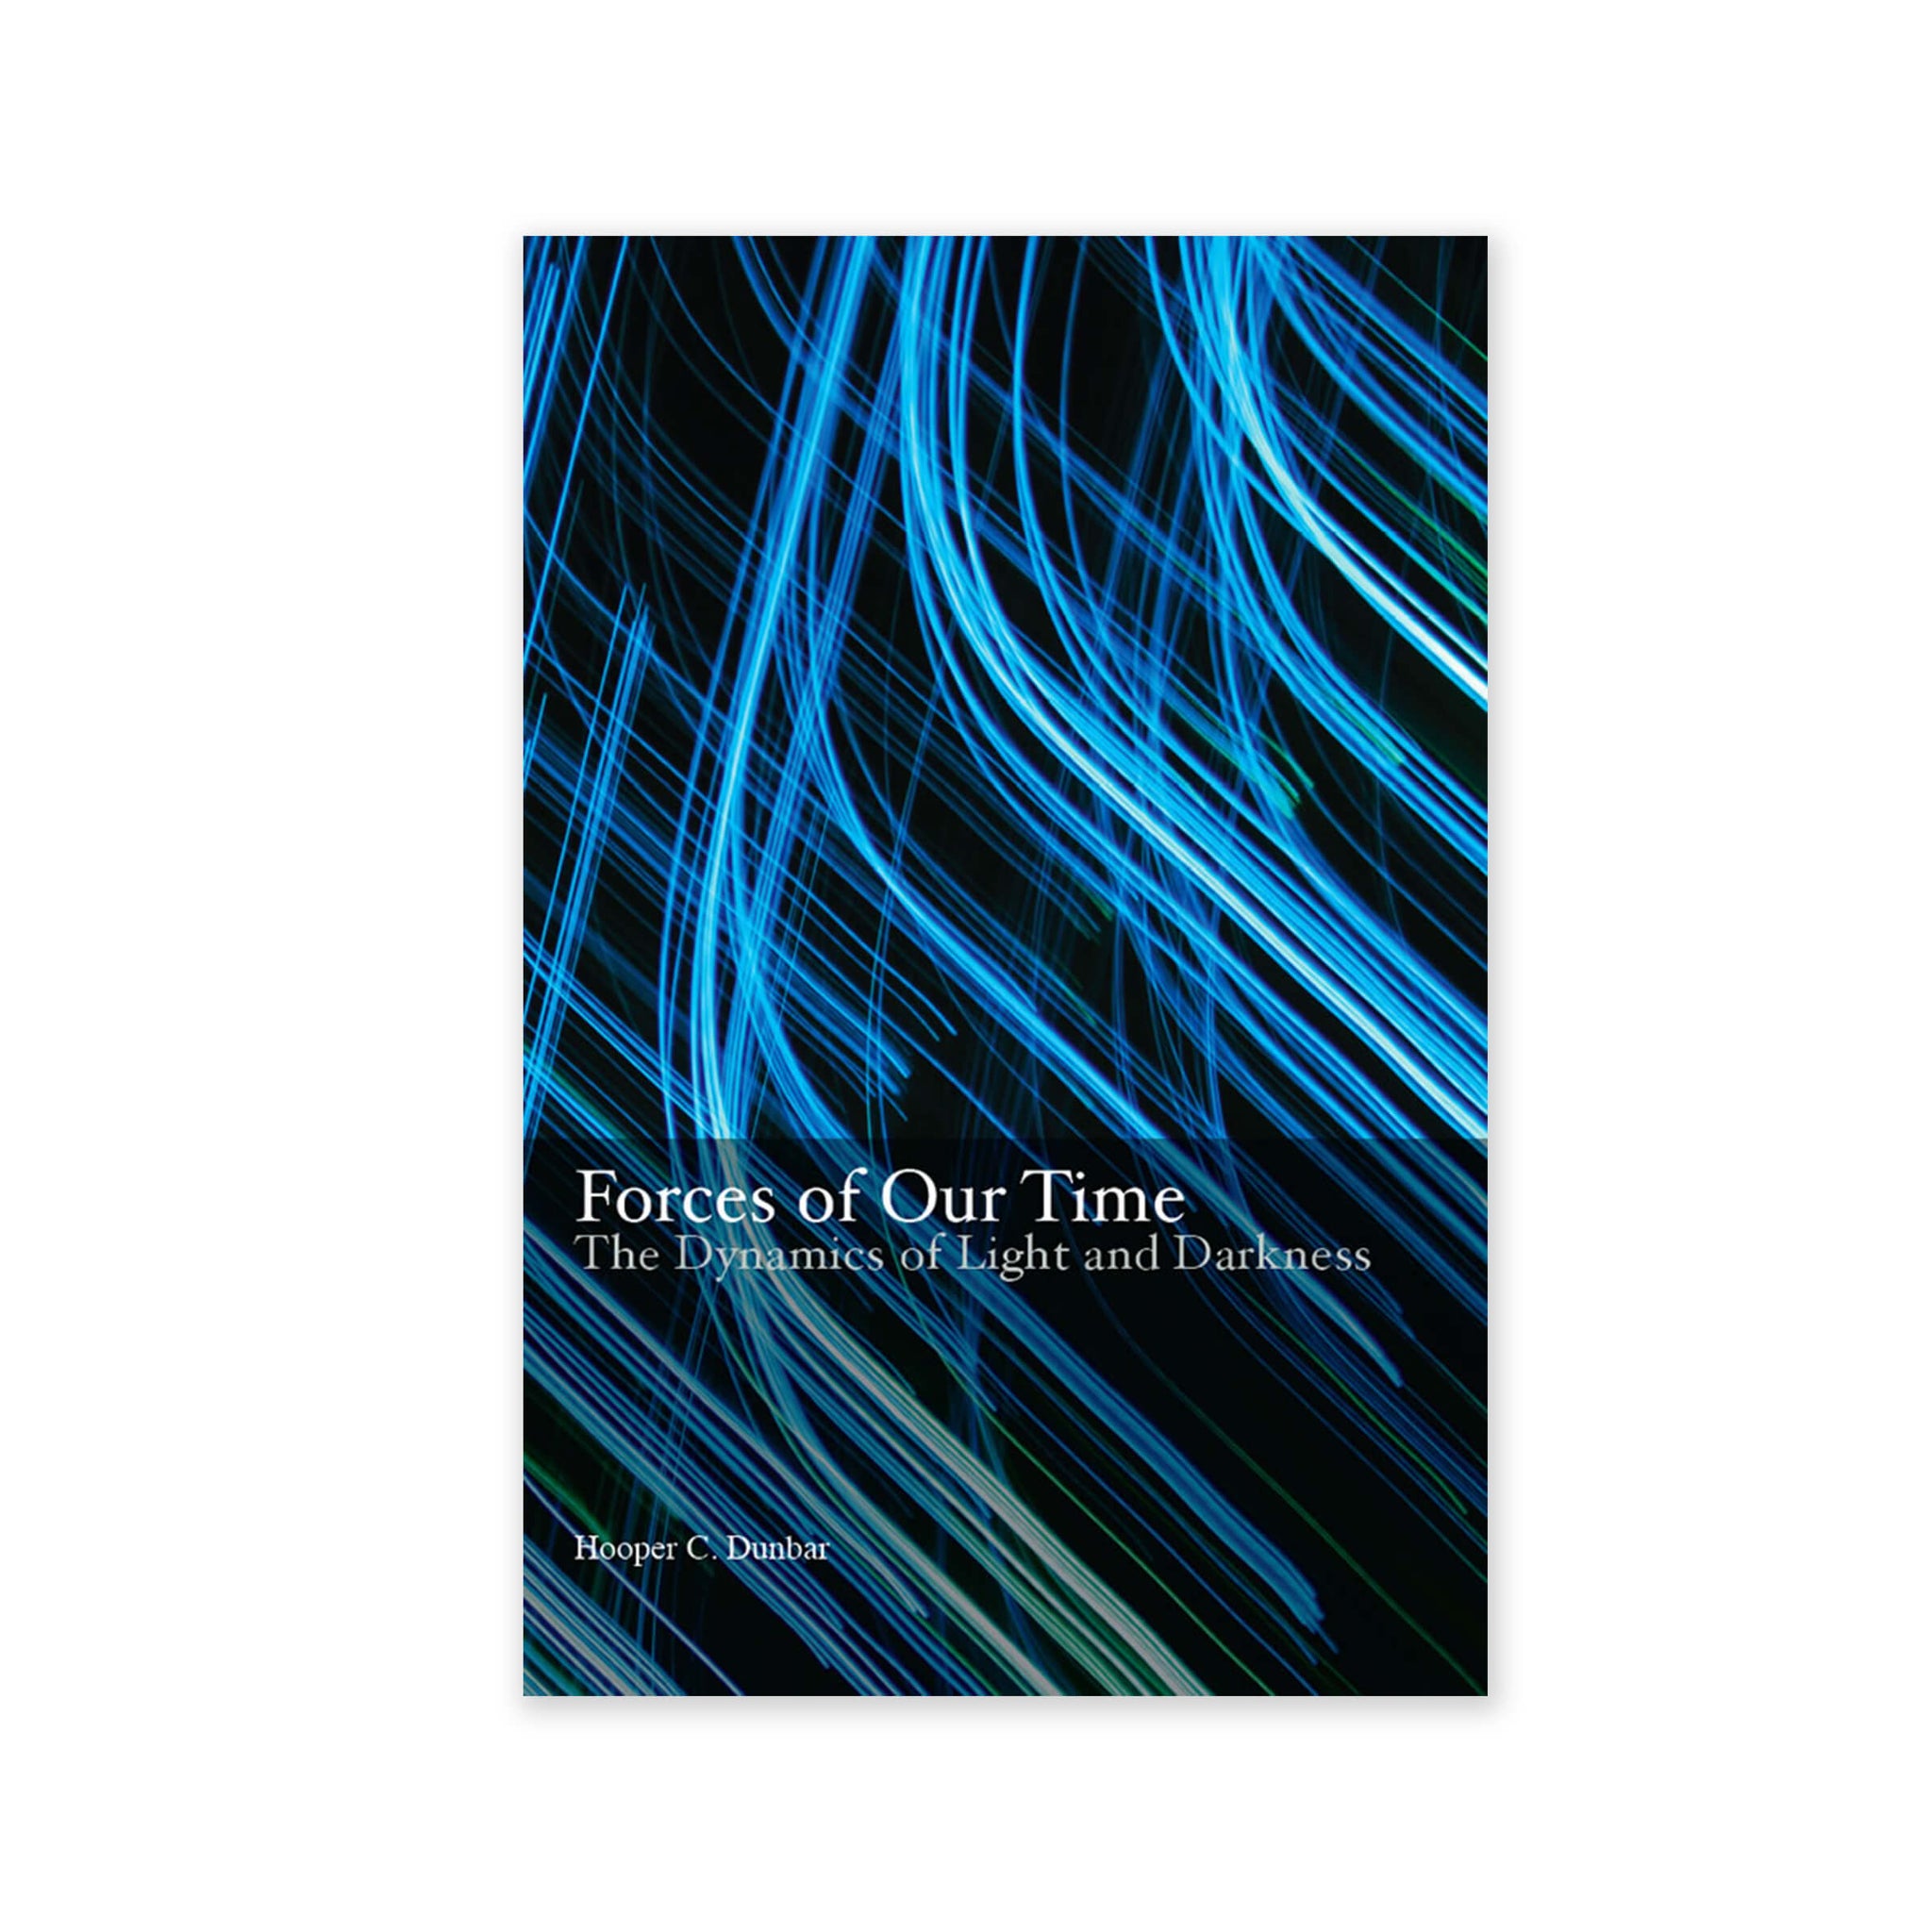 Forces of Our Time - The Dynamics of Light and Darkness